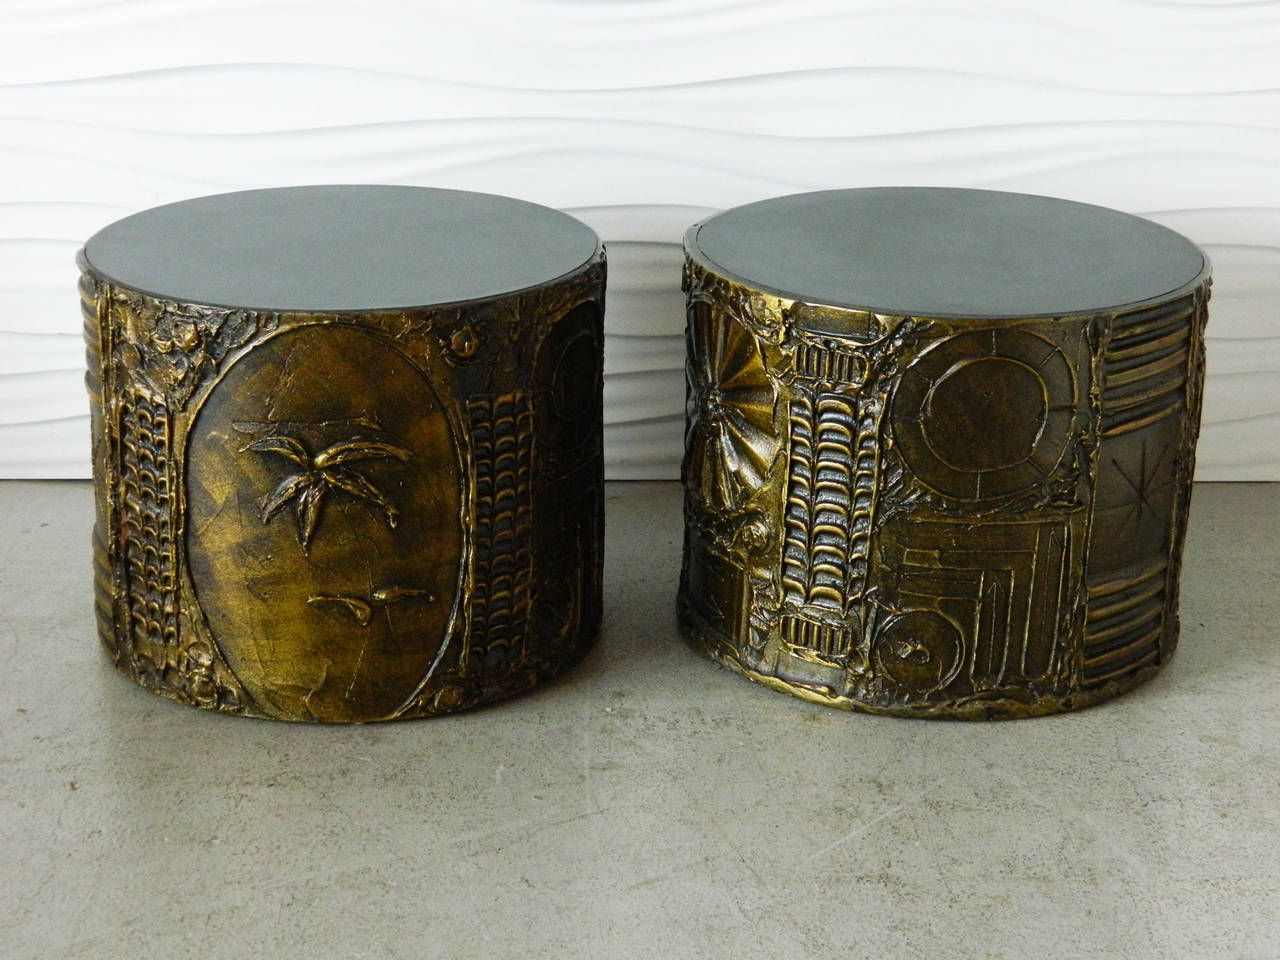 Paying homage to Paul Evans' sculpted bronze series, this pair of Brutalist drum tables by Adrian Pearsall features black laminate tops and nature motifs in a sculpted resin.